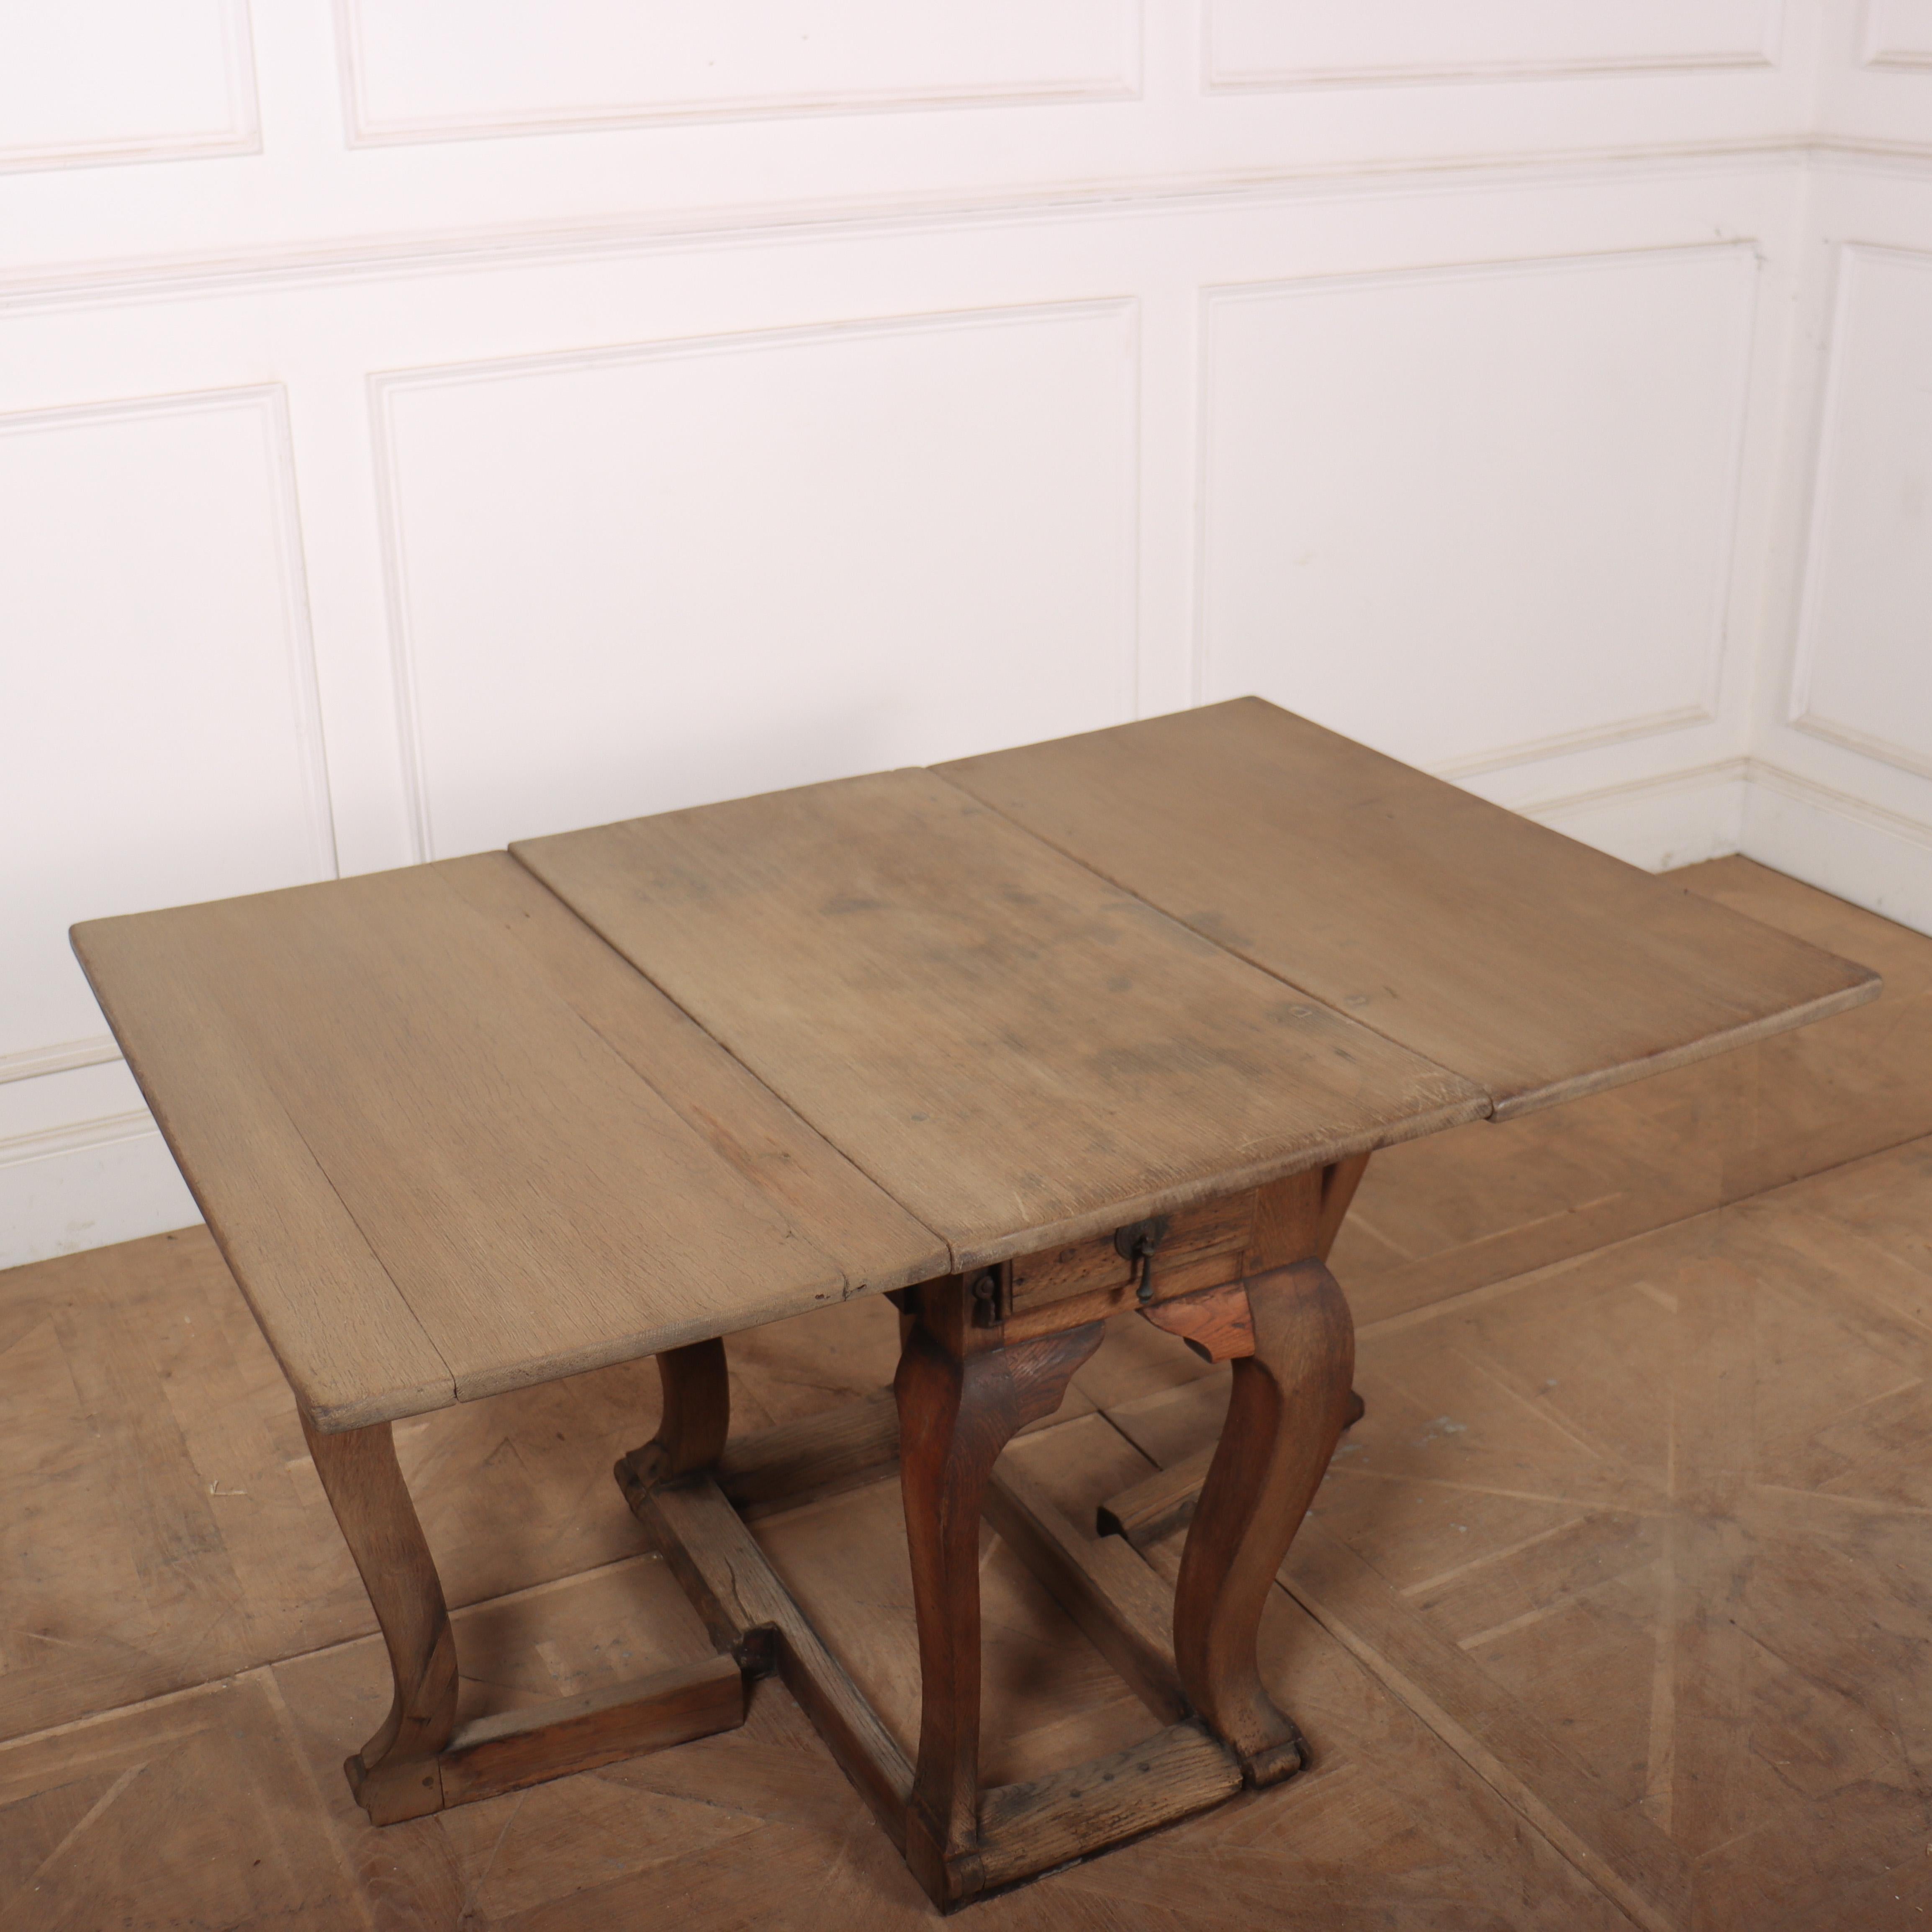 Unusual 18th C Dutch oak Gate-leg table with two drawers. Lovely dry finish. 1760.

Width with leaves up is 50